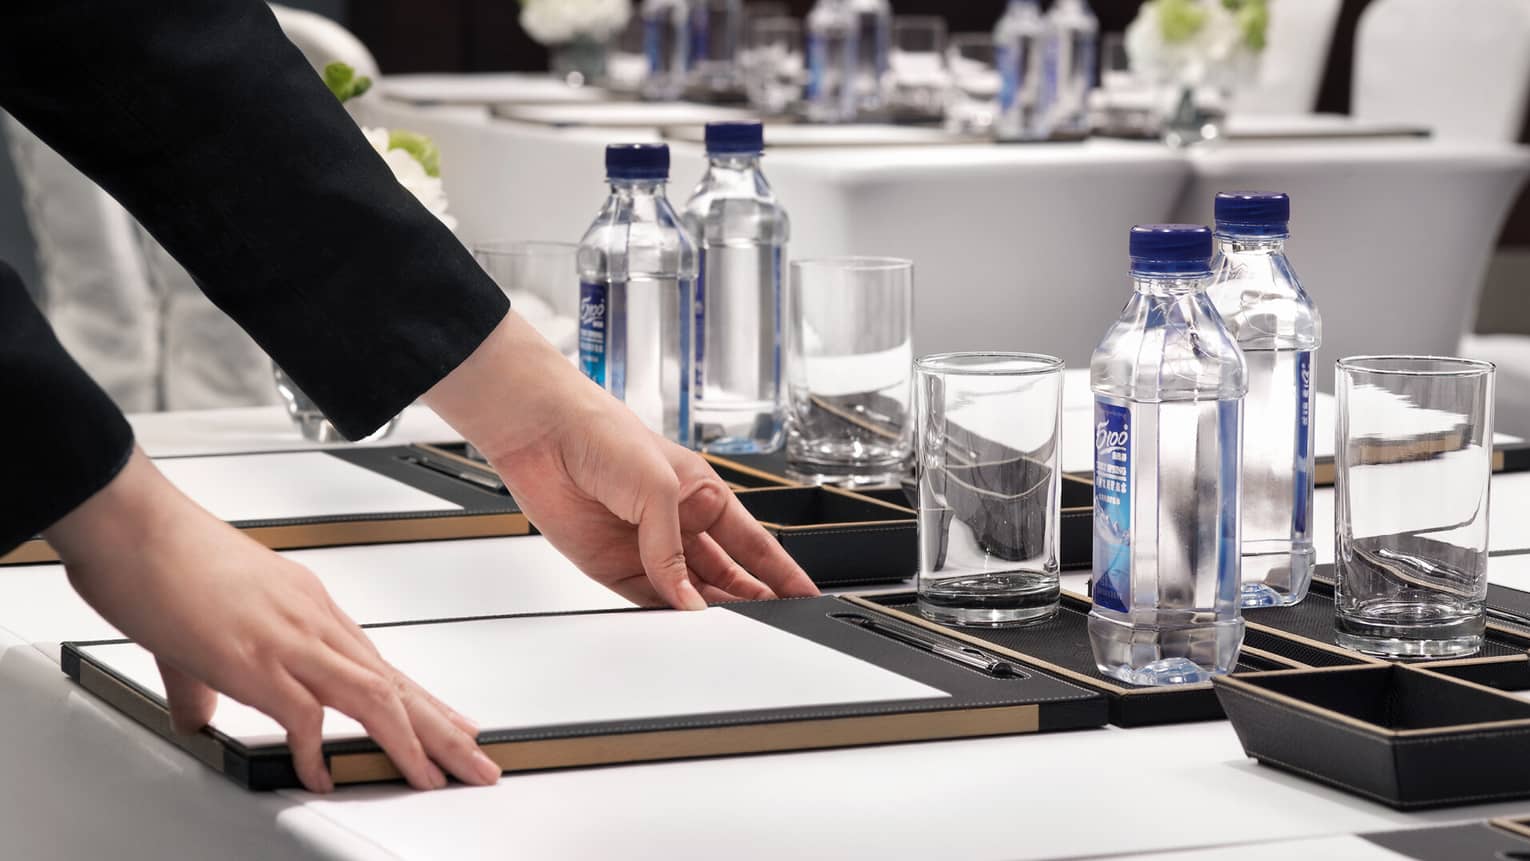 A person adjusts a writing pad on a conference room table with bottled water, glasses and floral arrangements